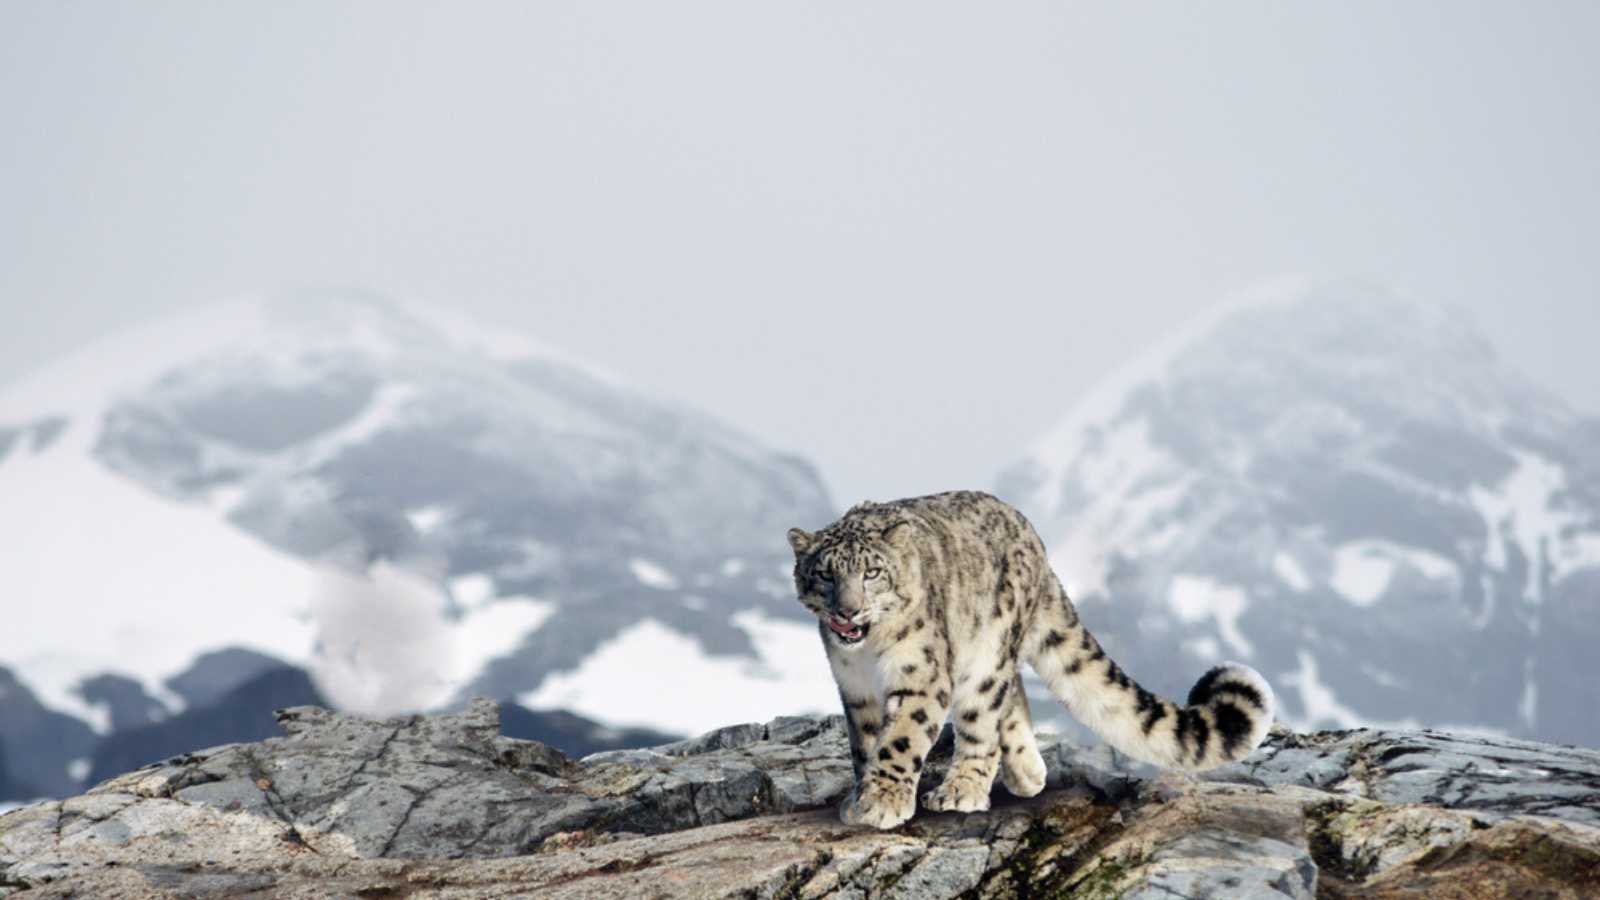 Snow leopard in the snow covered mountains